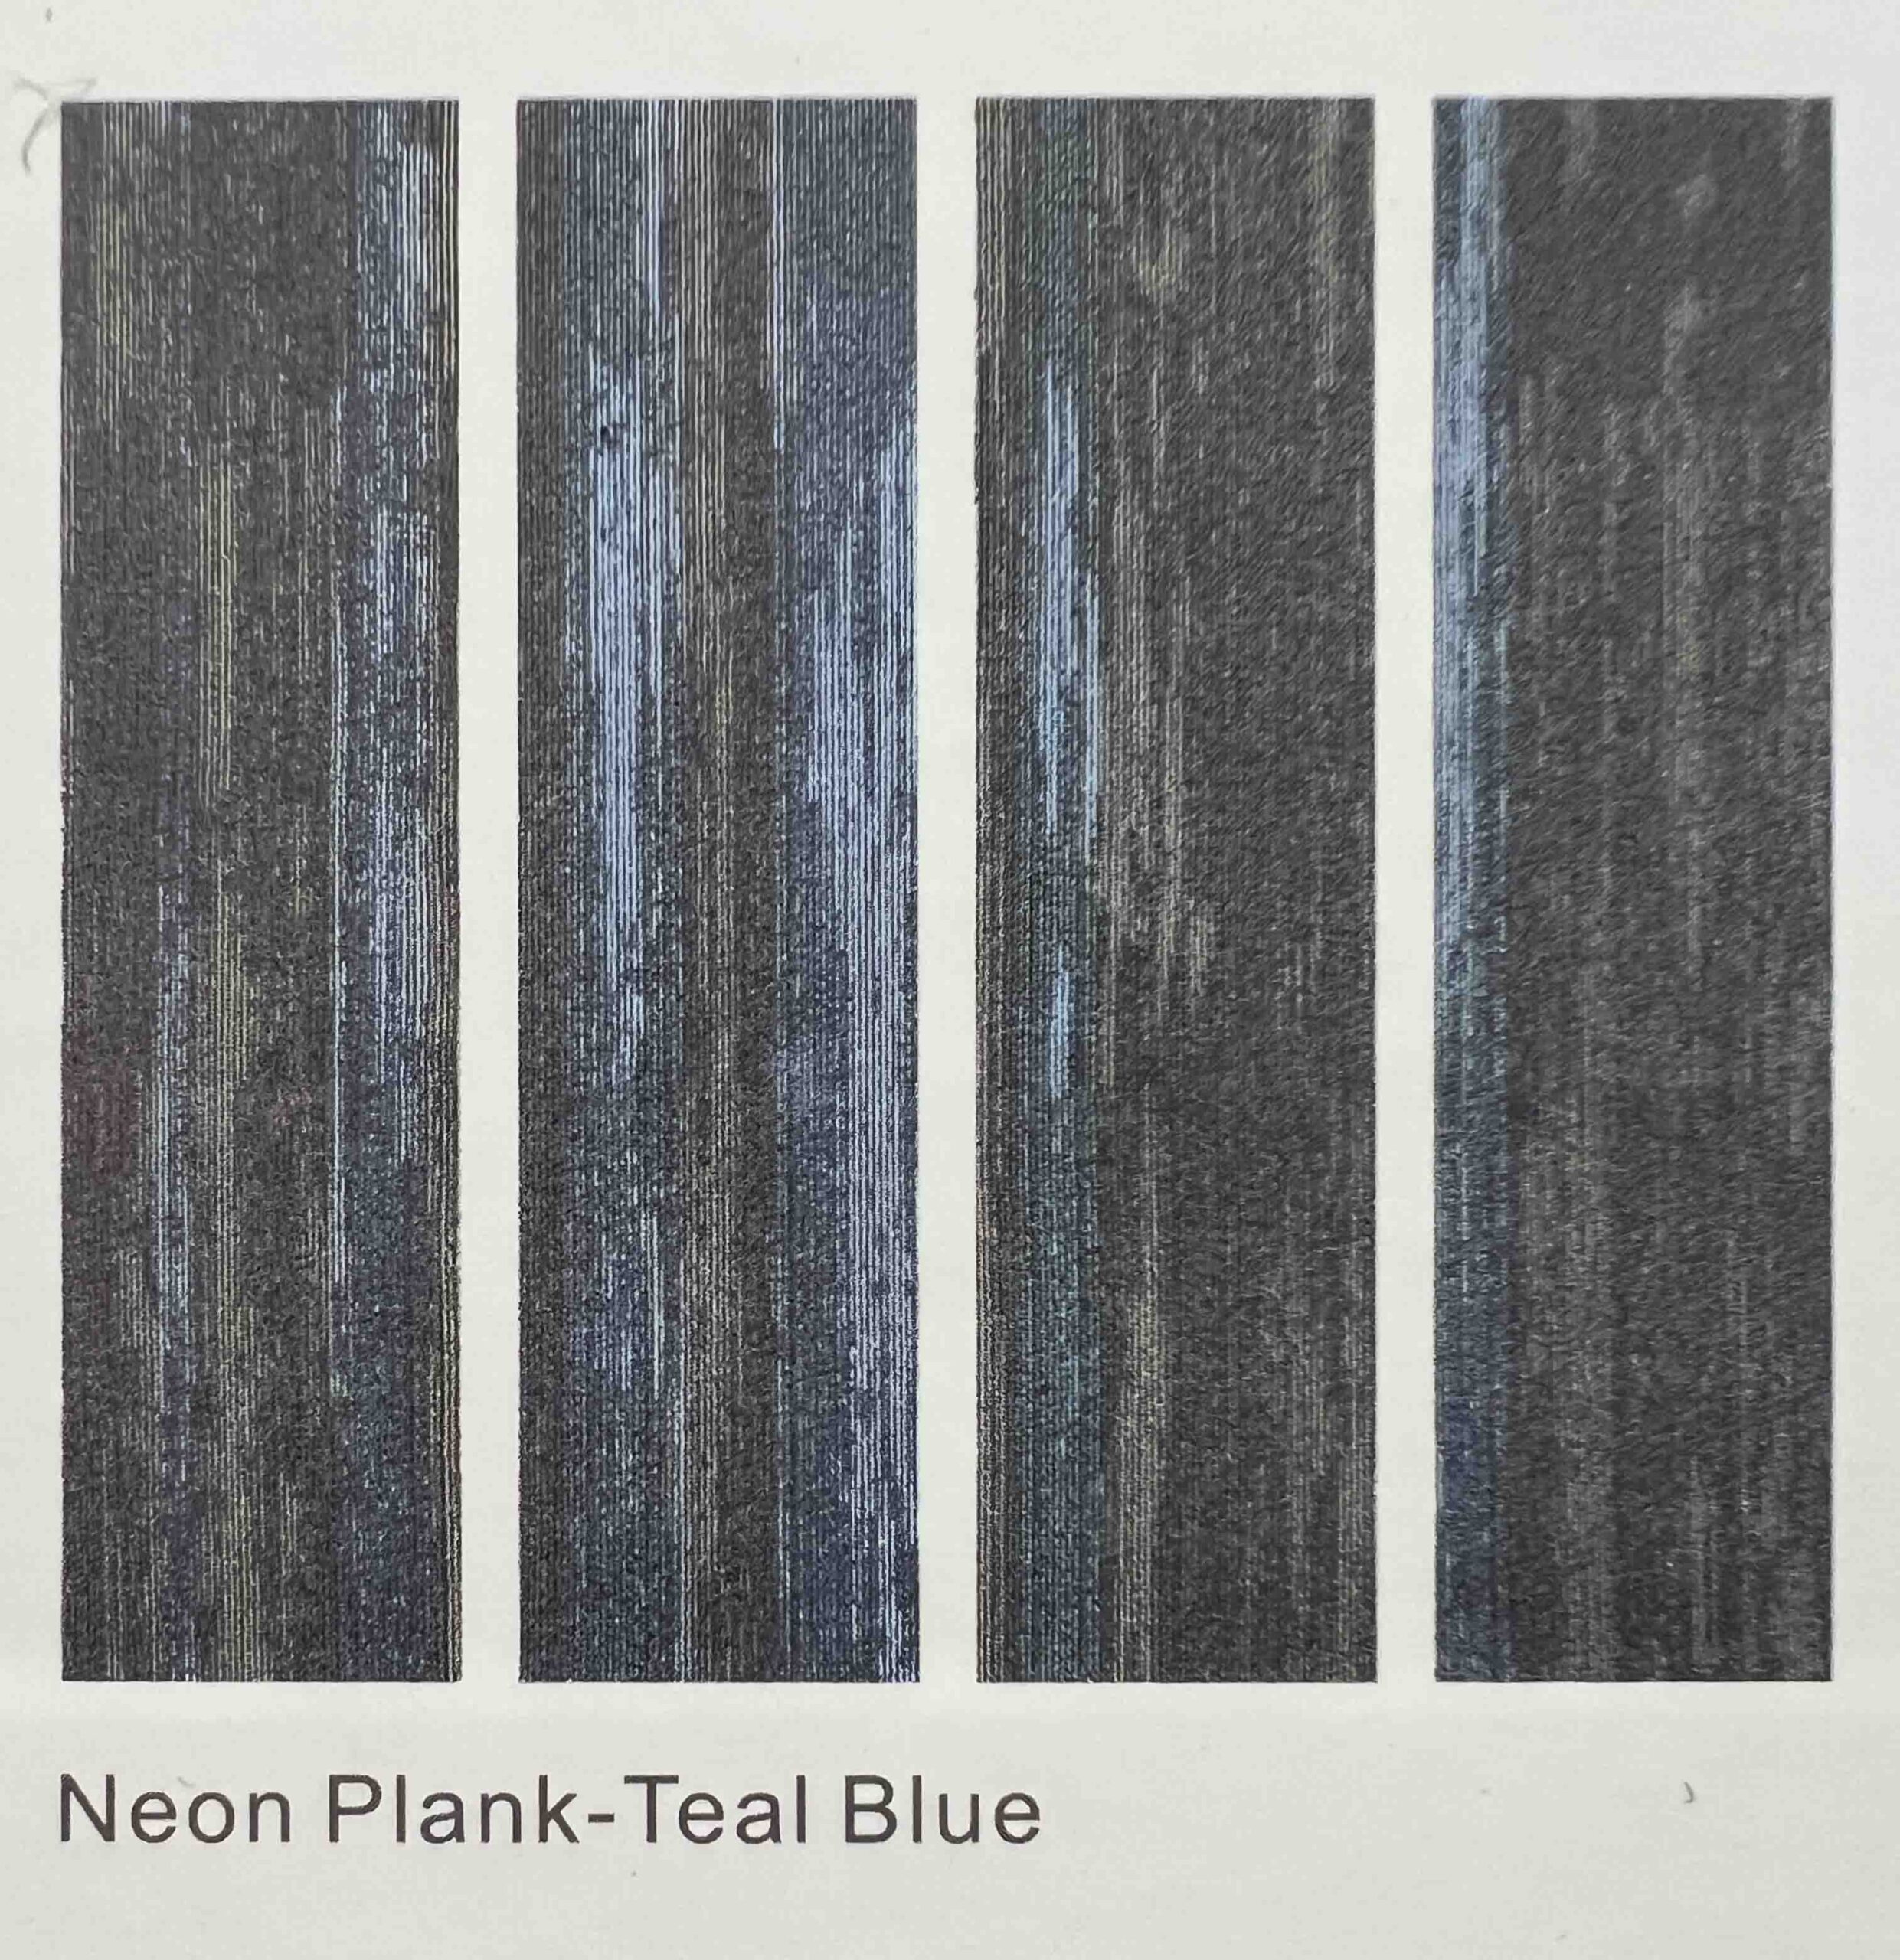 NEON PLANK-TEAL BLUE